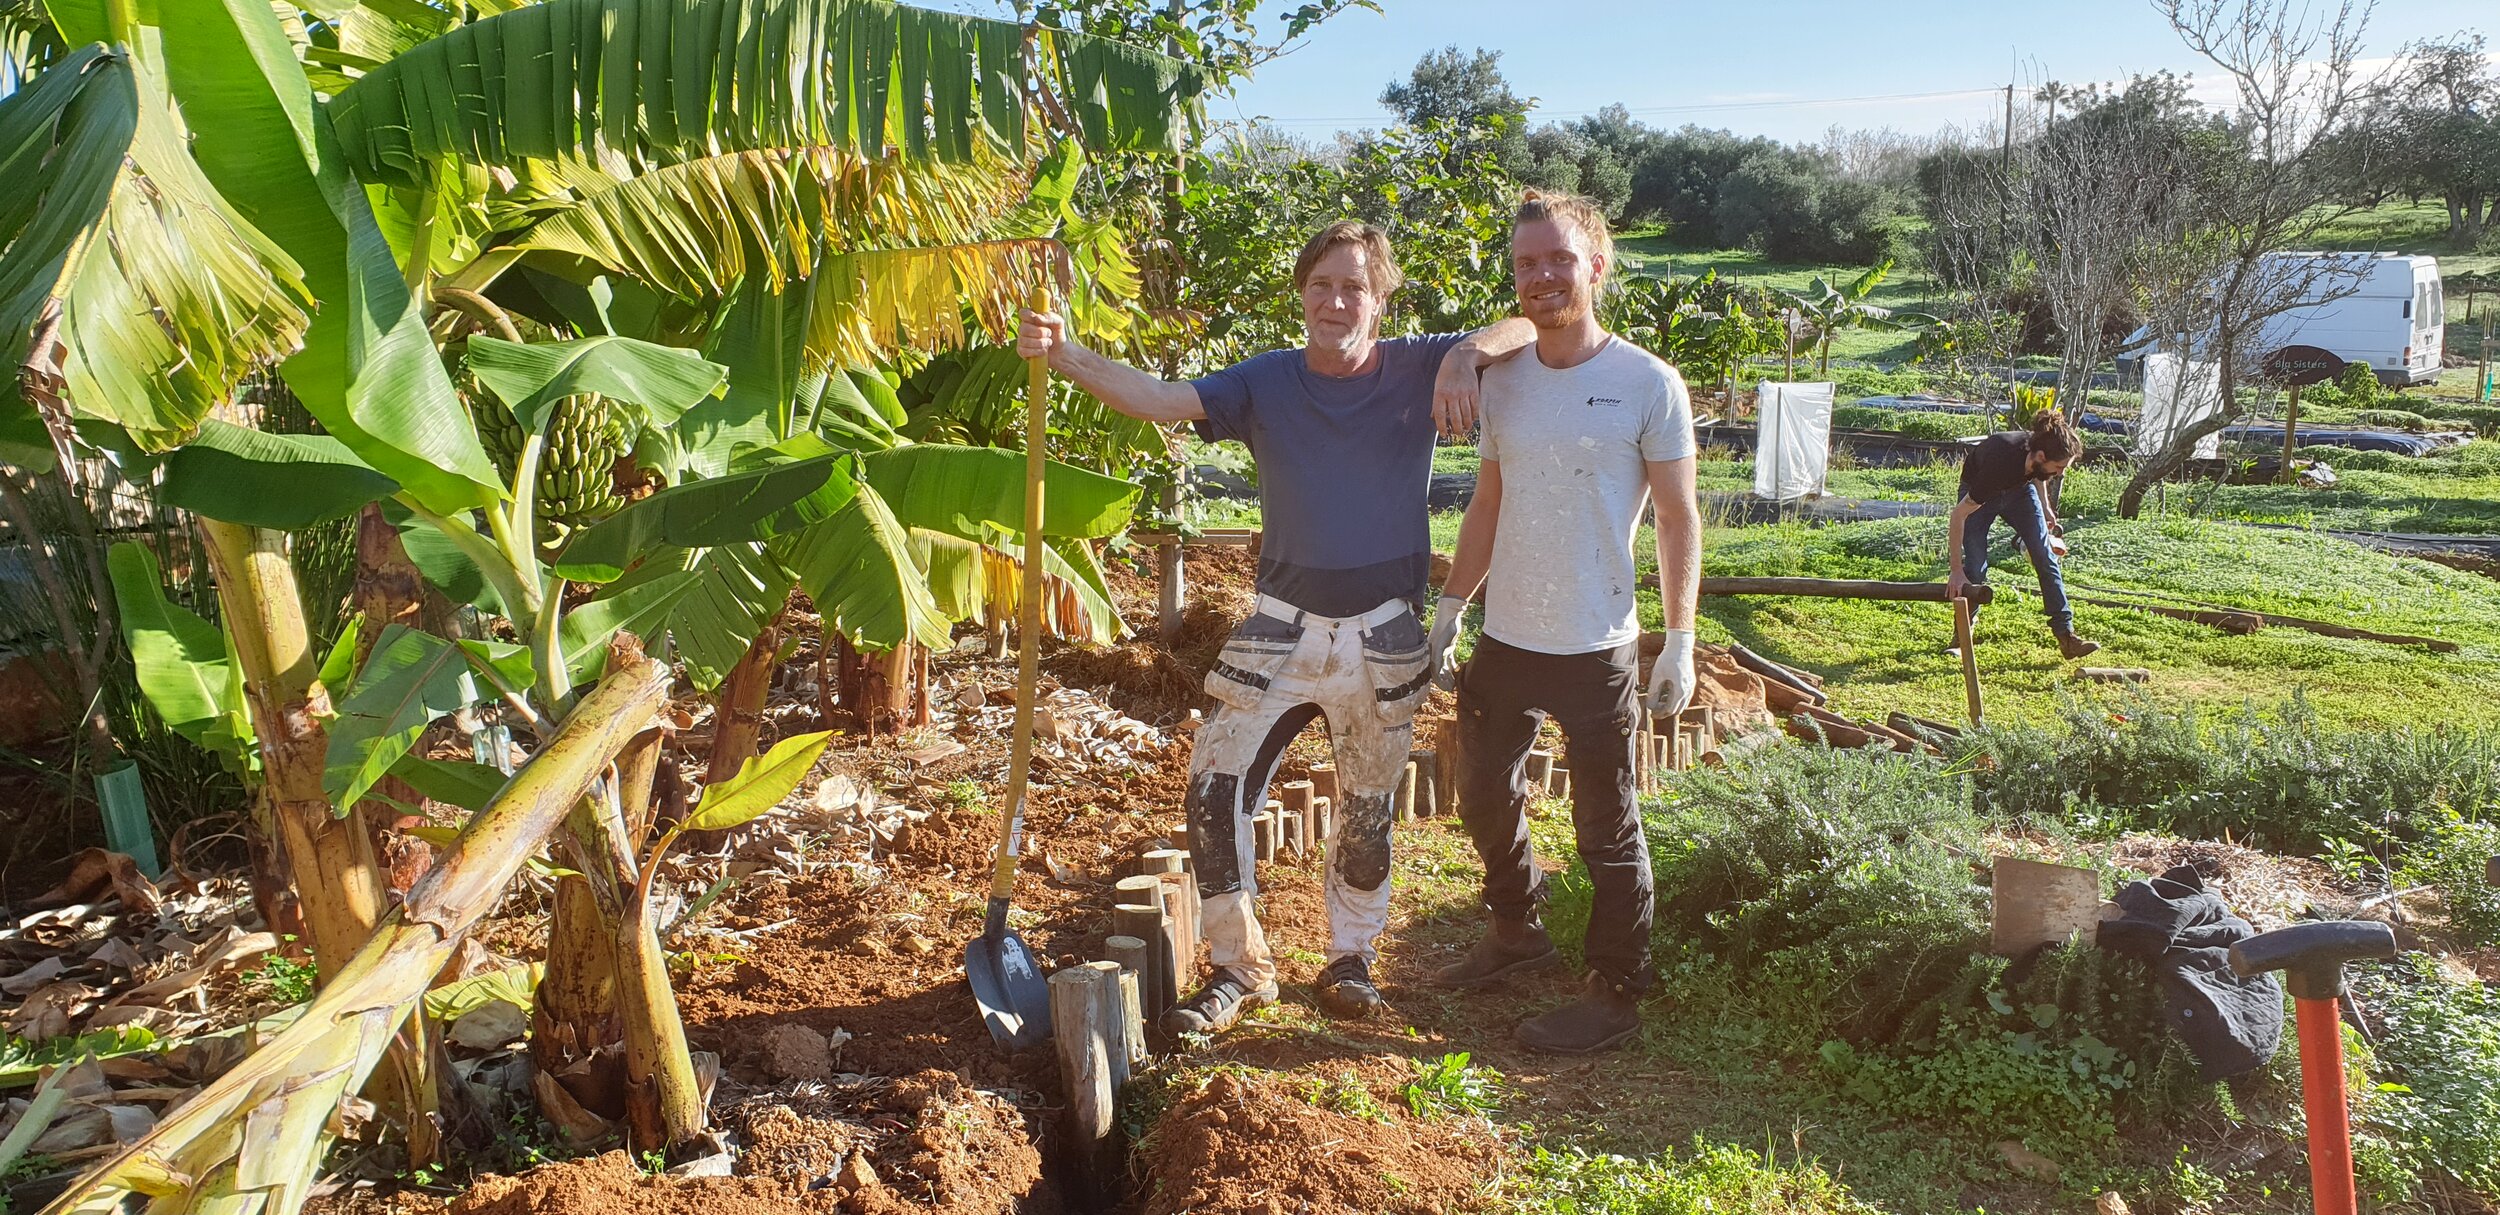 wwoofer from Sweden planting a rare banana tree, Musa Lep Chang Kut